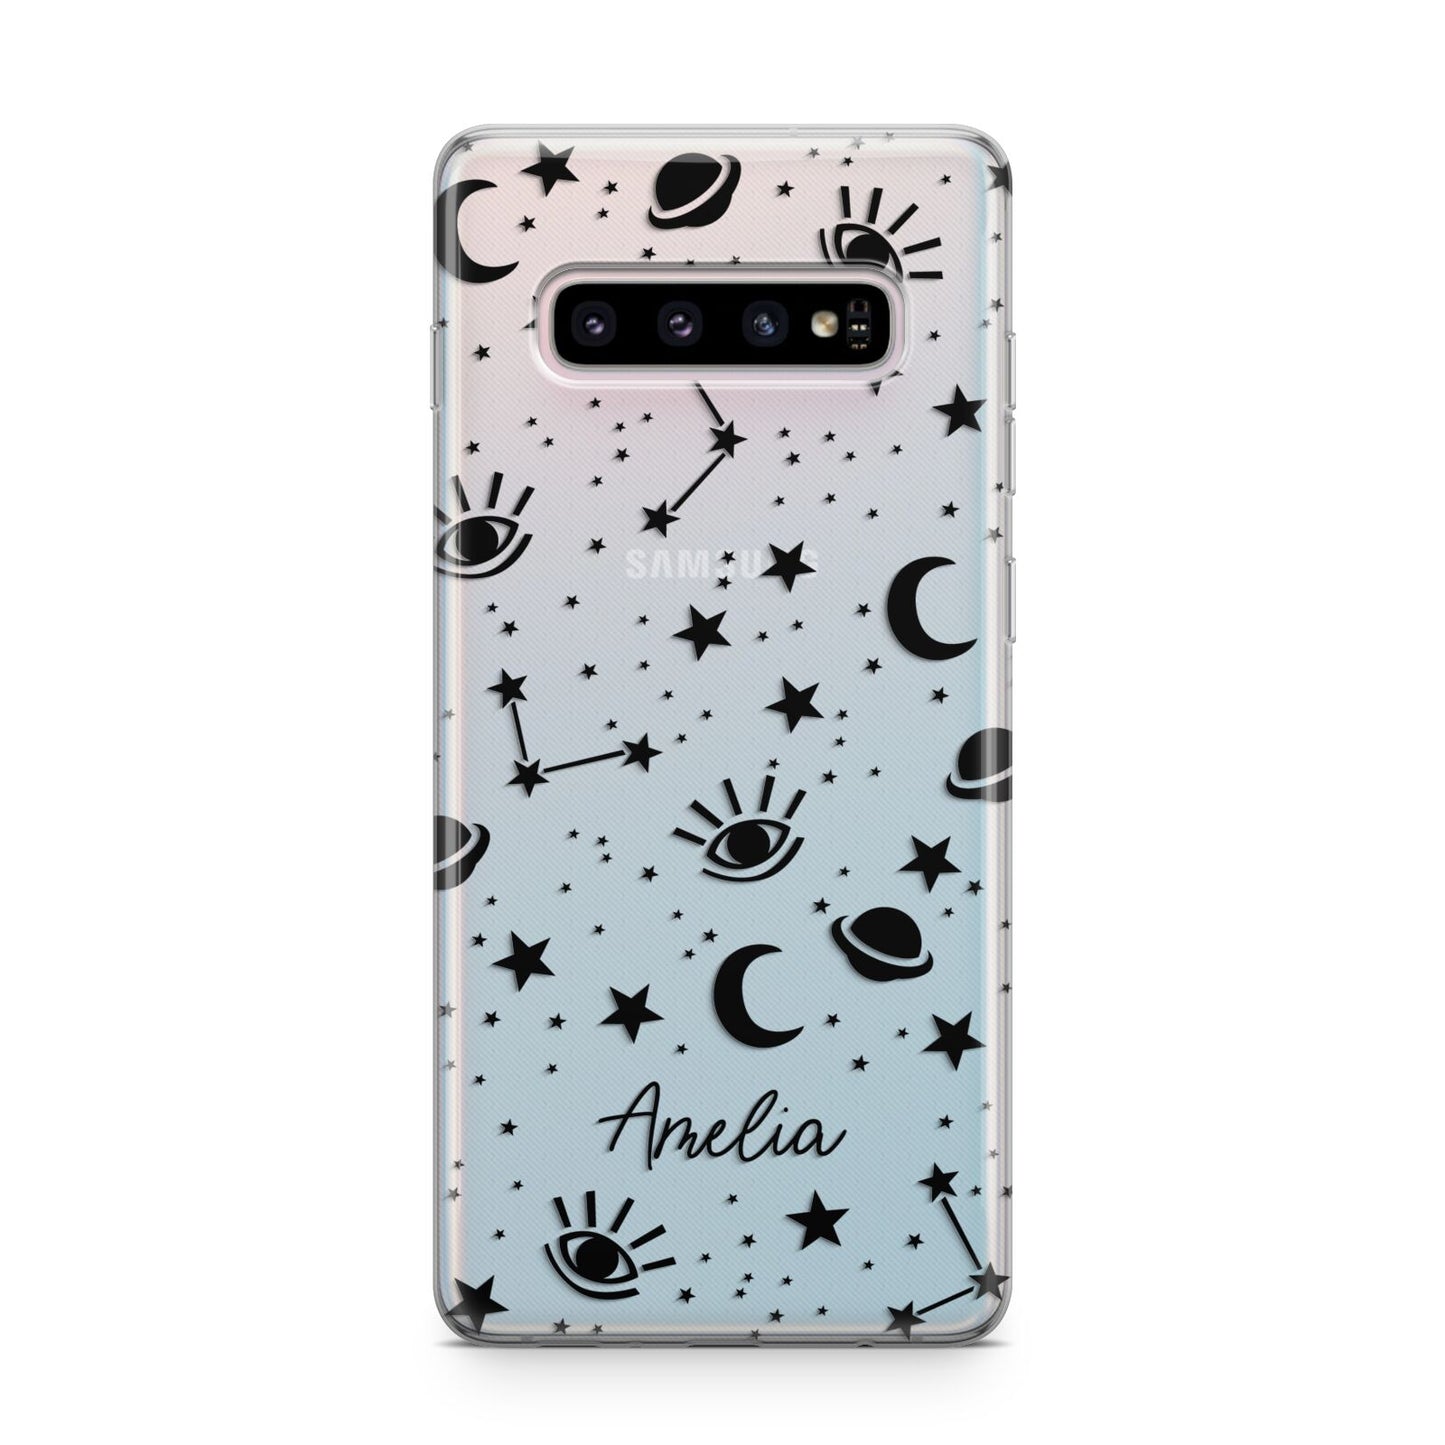 Monochrome Zodiac Constellations with Name Samsung Galaxy S10 Plus Case